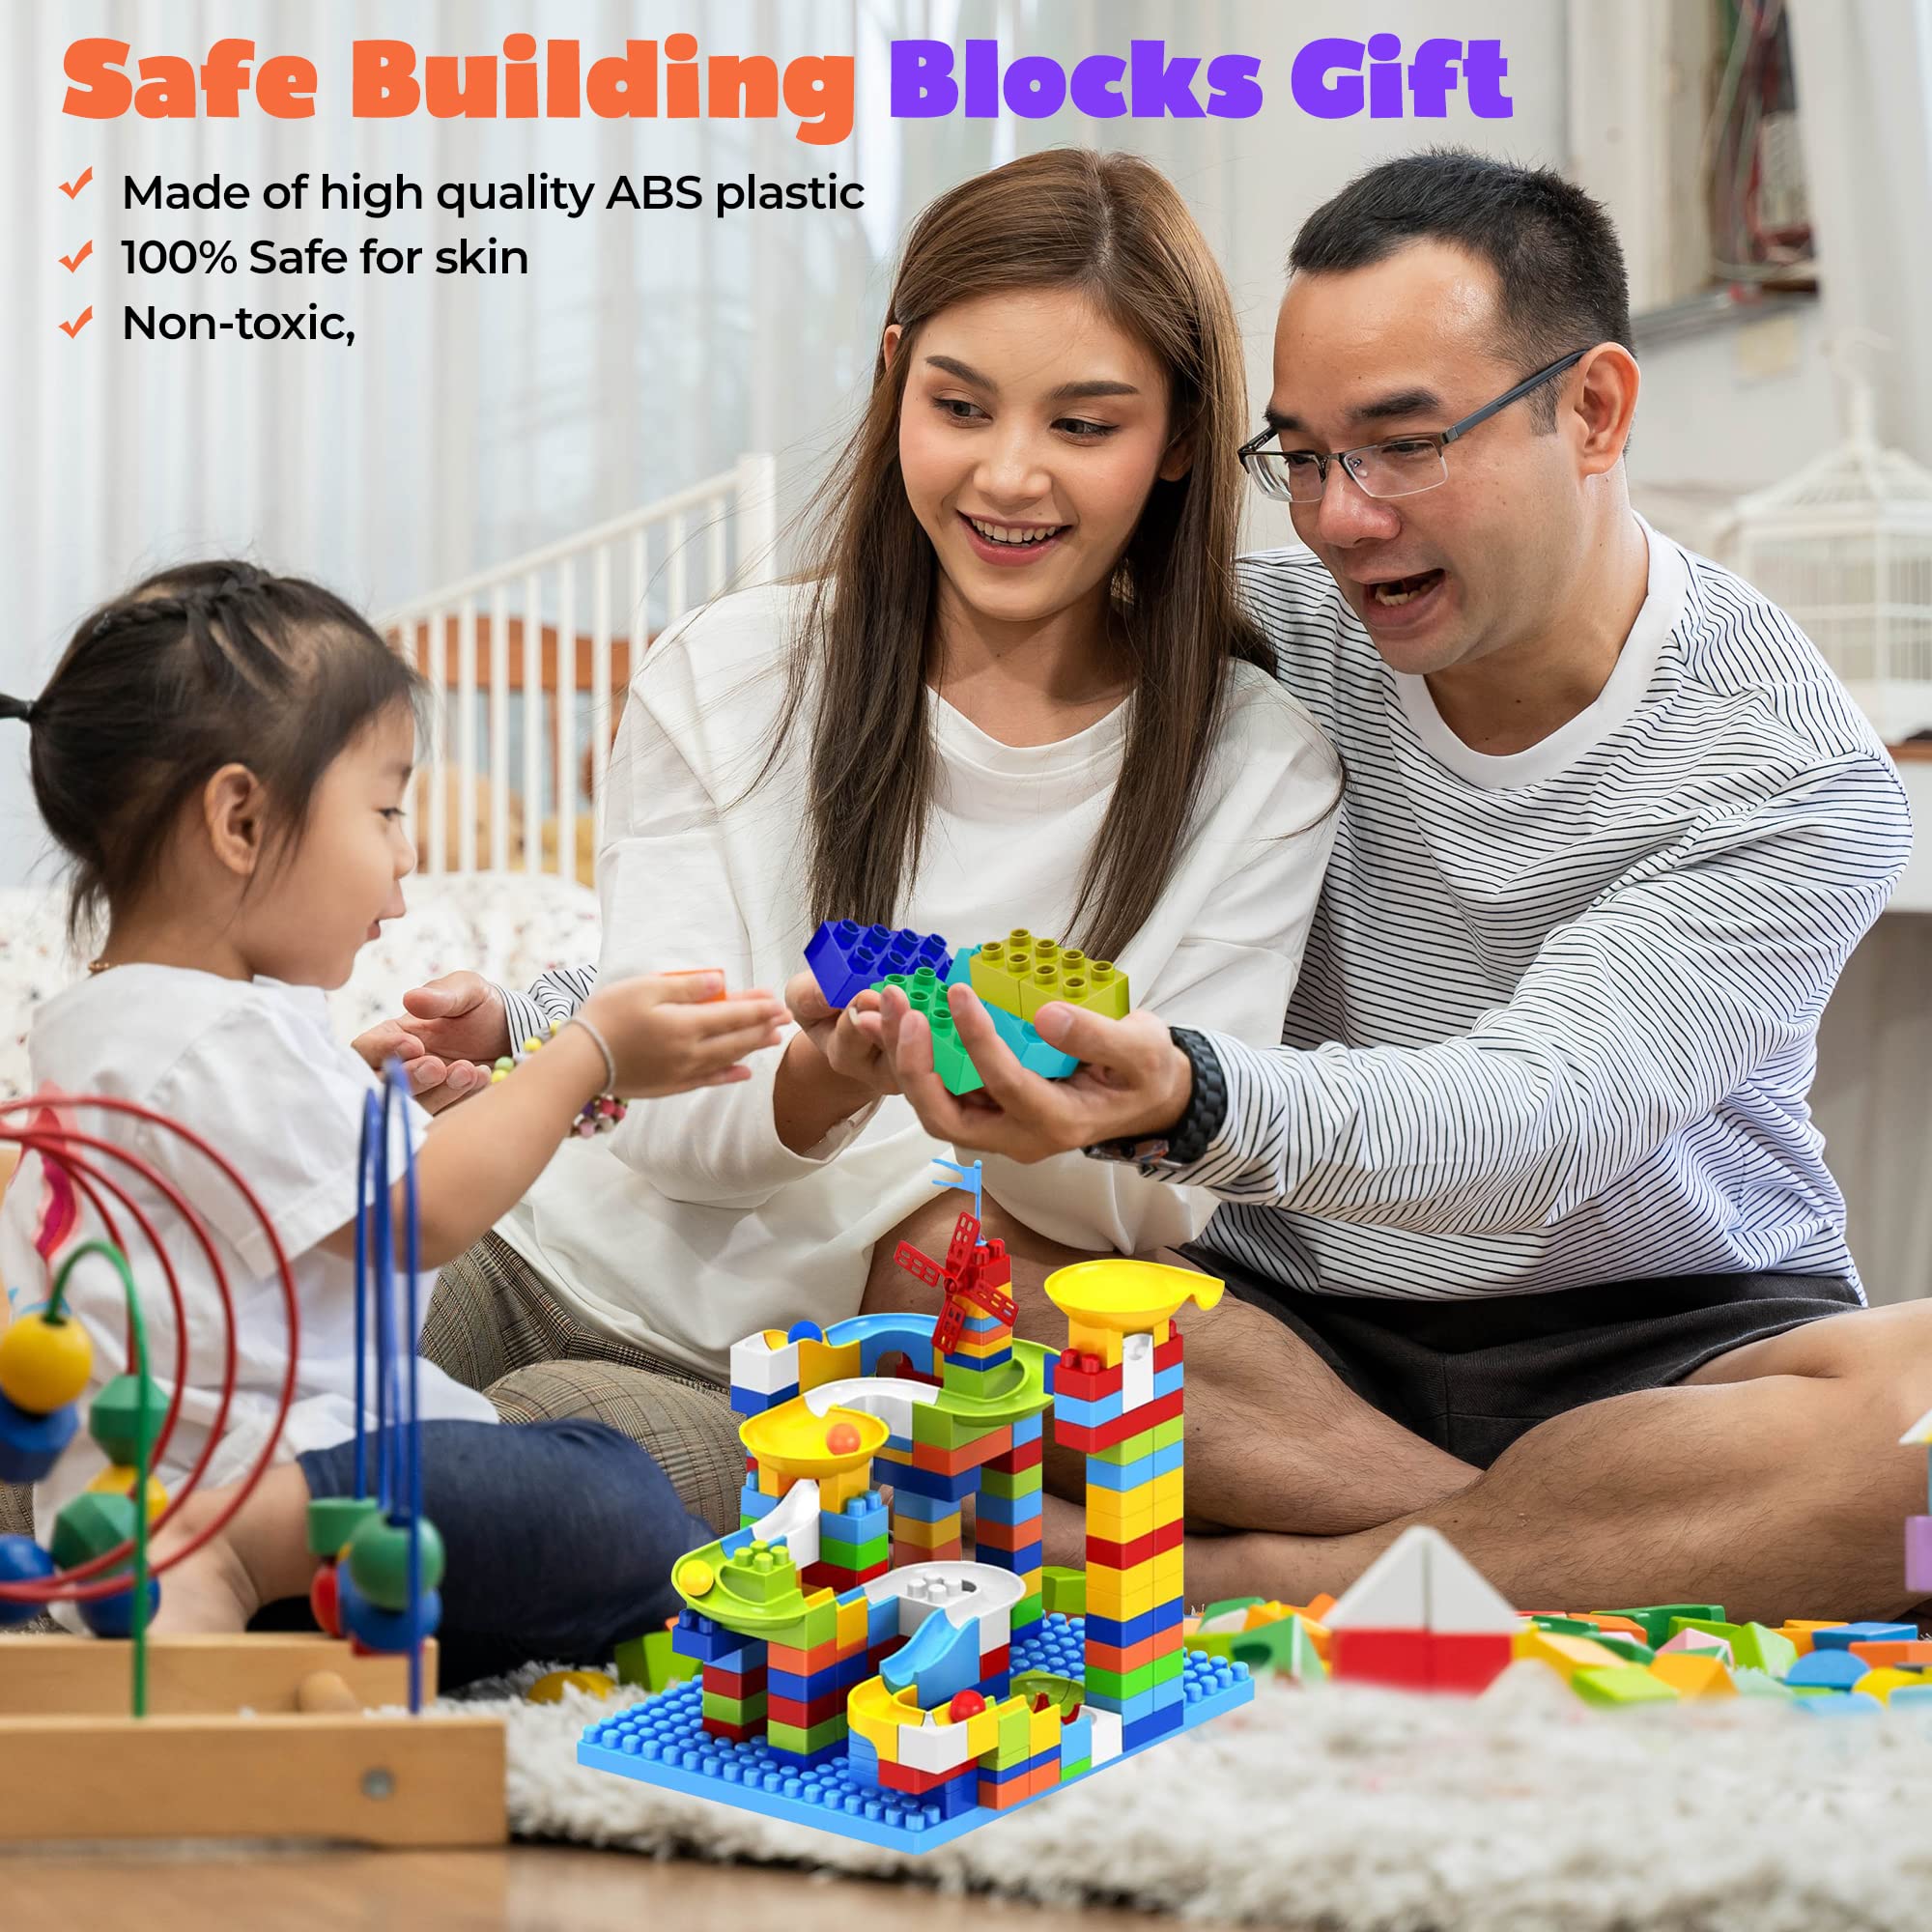 STEM Building Blocks DIY Toy for Kids, Educational Toddlers Toddler Toy Kit, Constructions Toys for 3 4 5 6 7 8 Years Age Boys and Girls - Creativity Kids Toys